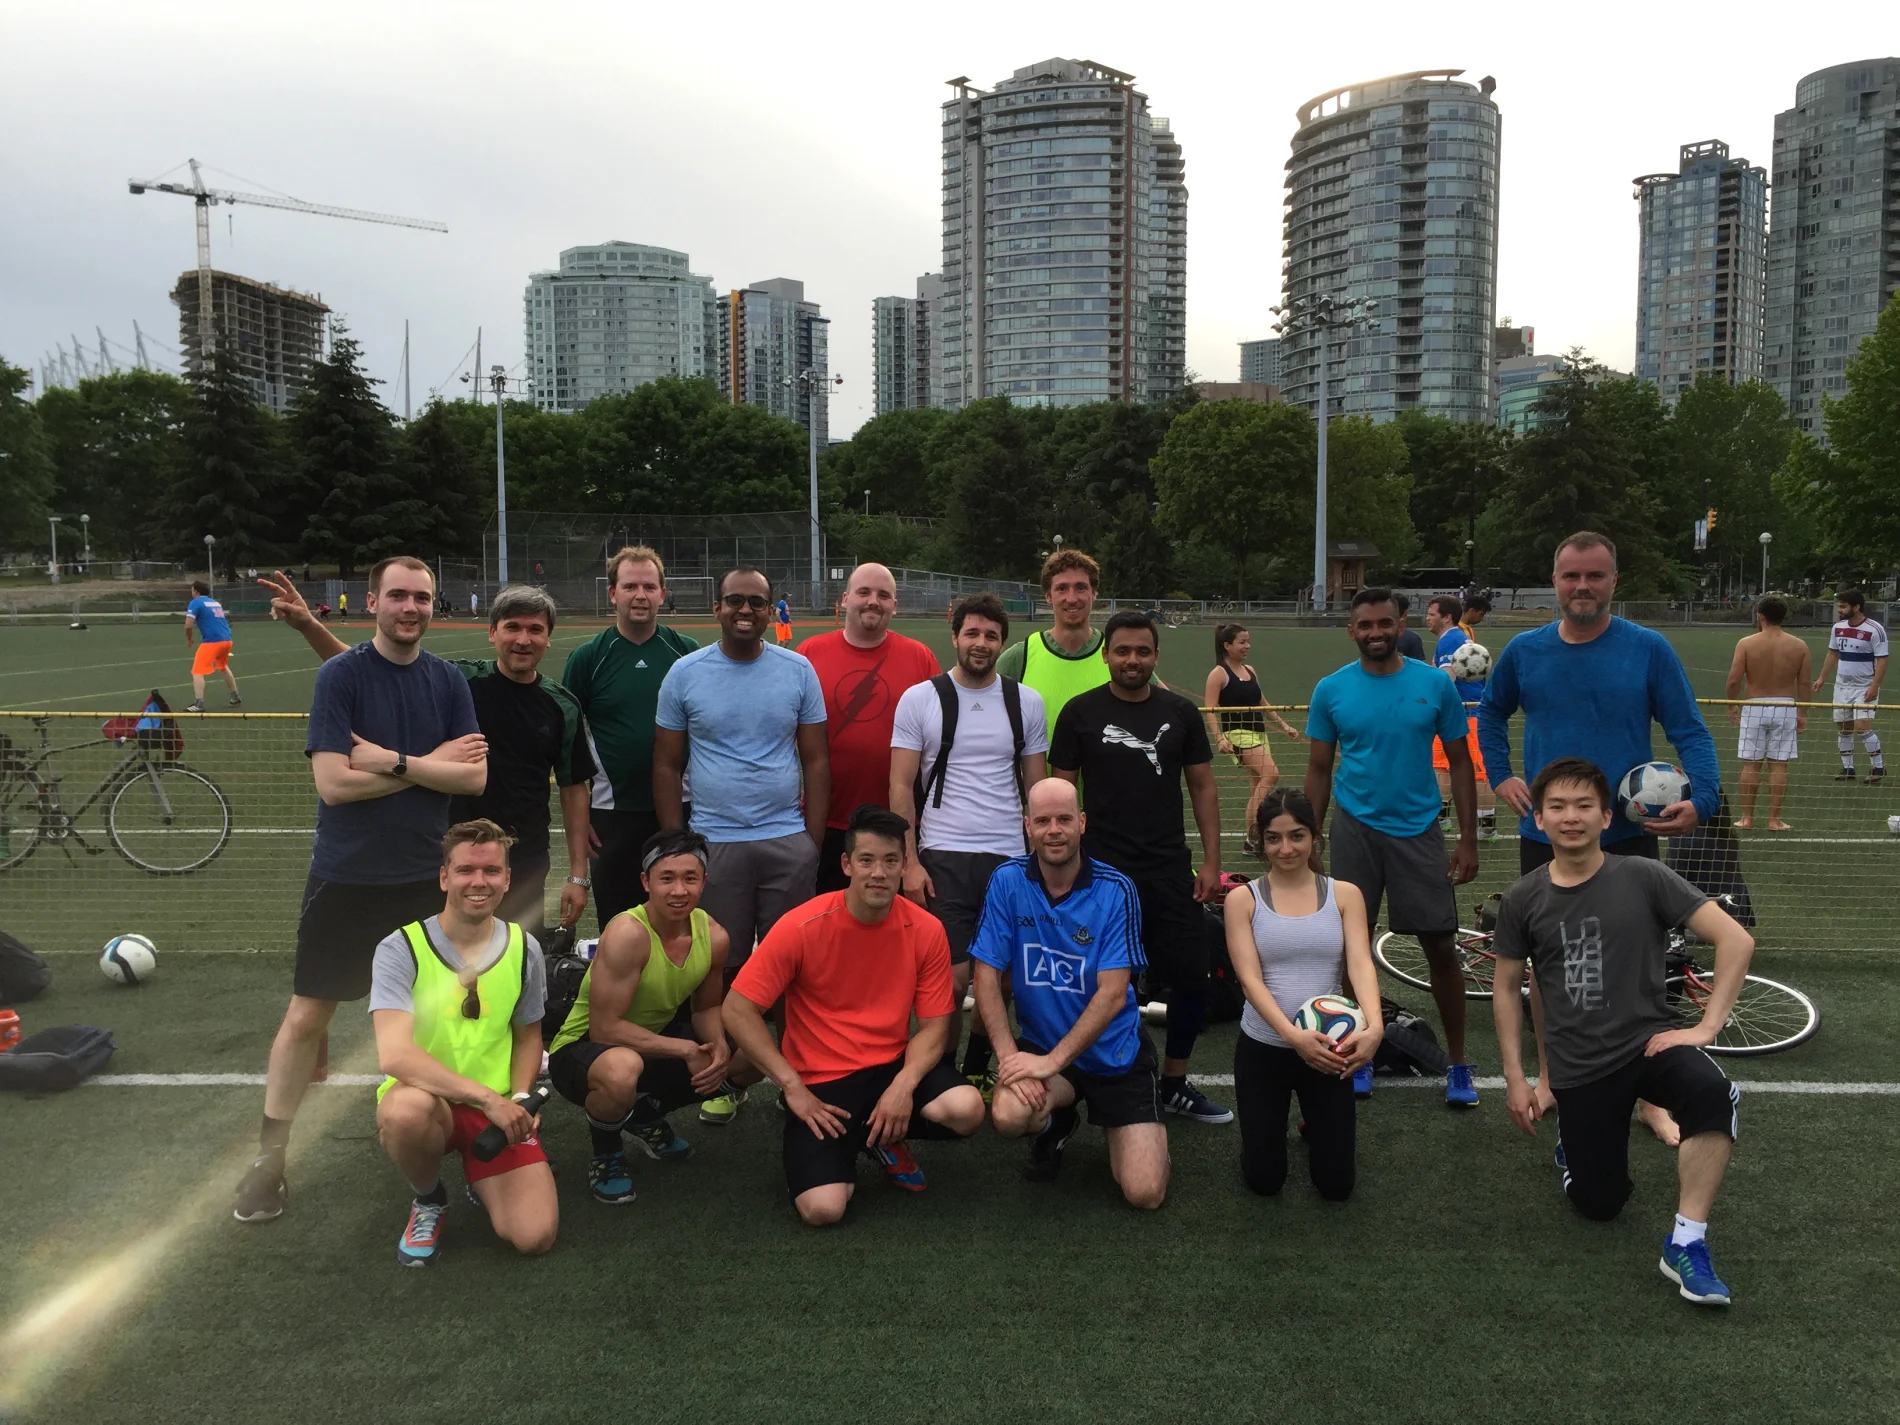 Several team members pose after a soccer game